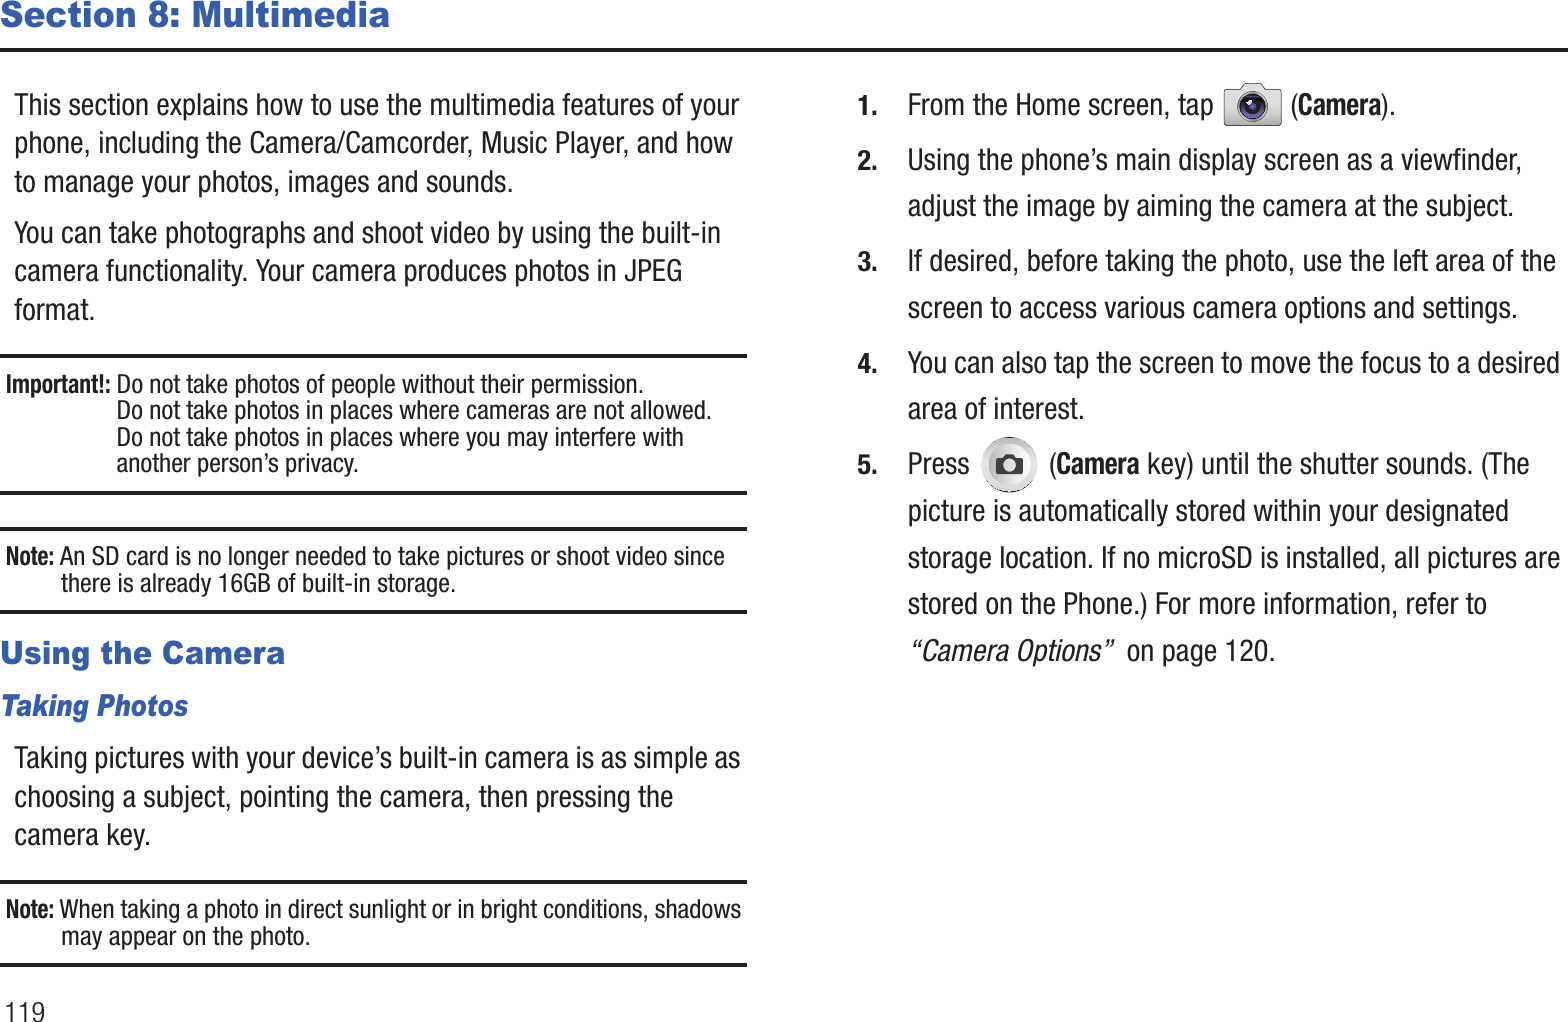 119Section 8: MultimediaThis section explains how to use the multimedia features of your phone, including the Camera/Camcorder, Music Player, and how to manage your photos, images and sounds.You can take photographs and shoot video by using the built-in camera functionality. Your camera produces photos in JPEG format.Important!: Do not take photos of people without their permission.Do not take photos in places where cameras are not allowed.Do not take photos in places where you may interfere with another person’s privacy.Note: An SD card is no longer needed to take pictures or shoot video since there is already 16GB of built-in storage.Using the CameraTaking PhotosTaking pictures with your device’s built-in camera is as simple as choosing a subject, pointing the camera, then pressing the camera key.Note: When taking a photo in direct sunlight or in bright conditions, shadows may appear on the photo.1. From the Home screen, tap  (Camera).2. Using the phone’s main display screen as a viewfinder, adjust the image by aiming the camera at the subject.3. If desired, before taking the photo, use the left area of the screen to access various camera options and settings.4. You can also tap the screen to move the focus to a desired area of interest.5. Press  (Camera key) until the shutter sounds. (The picture is automatically stored within your designated storage location. If no microSD is installed, all pictures are stored on the Phone.) For more information, refer to “Camera Options”  on page 120.